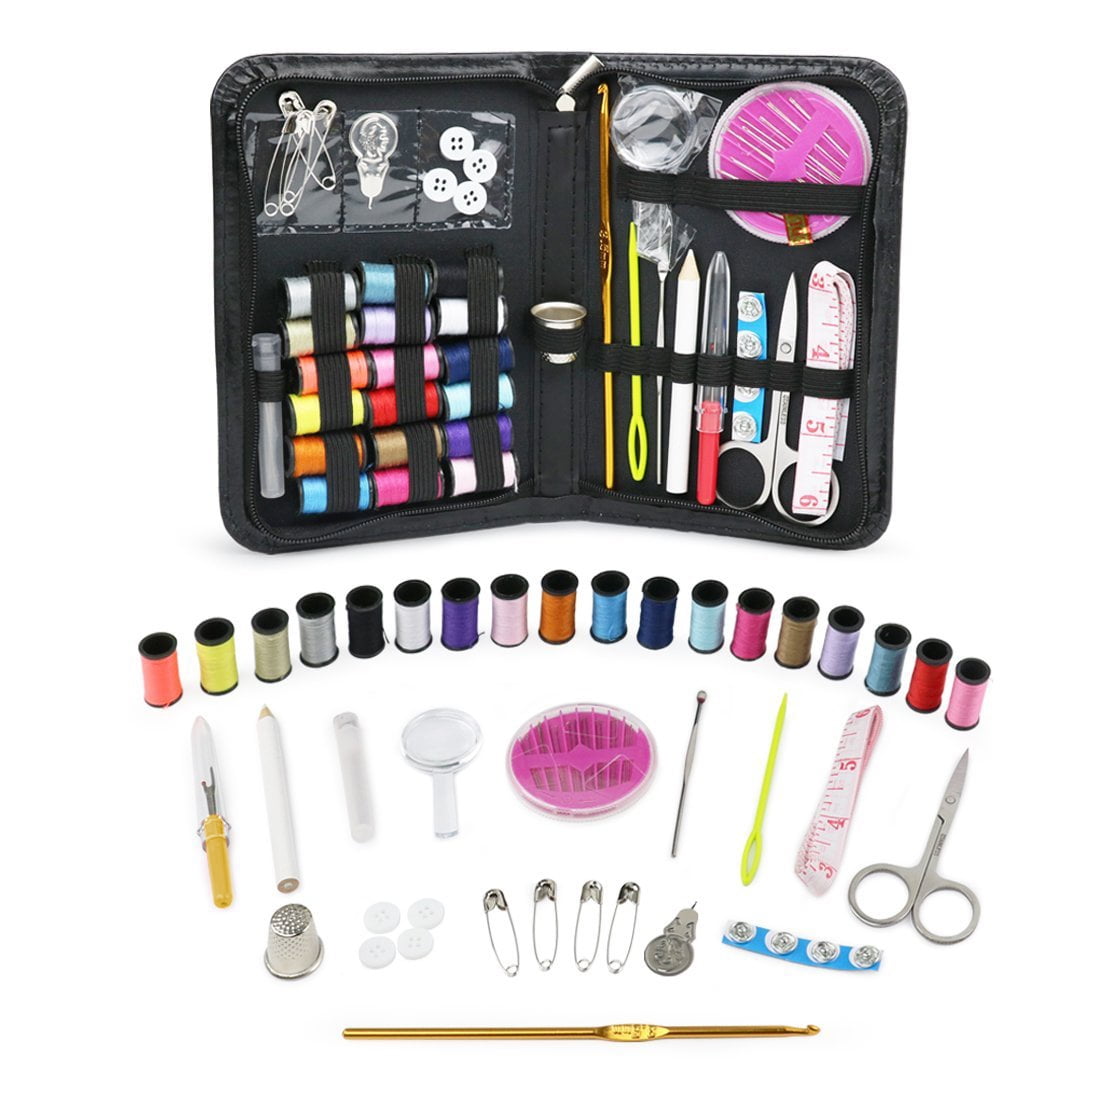 Qmisify Portable Sewing Kit, 49g CottonMini Sew Supplies Set, DIY Sewing  Kit, Sewing Accessories Set, Compact Mini Sewing Kit for Kids, Girls